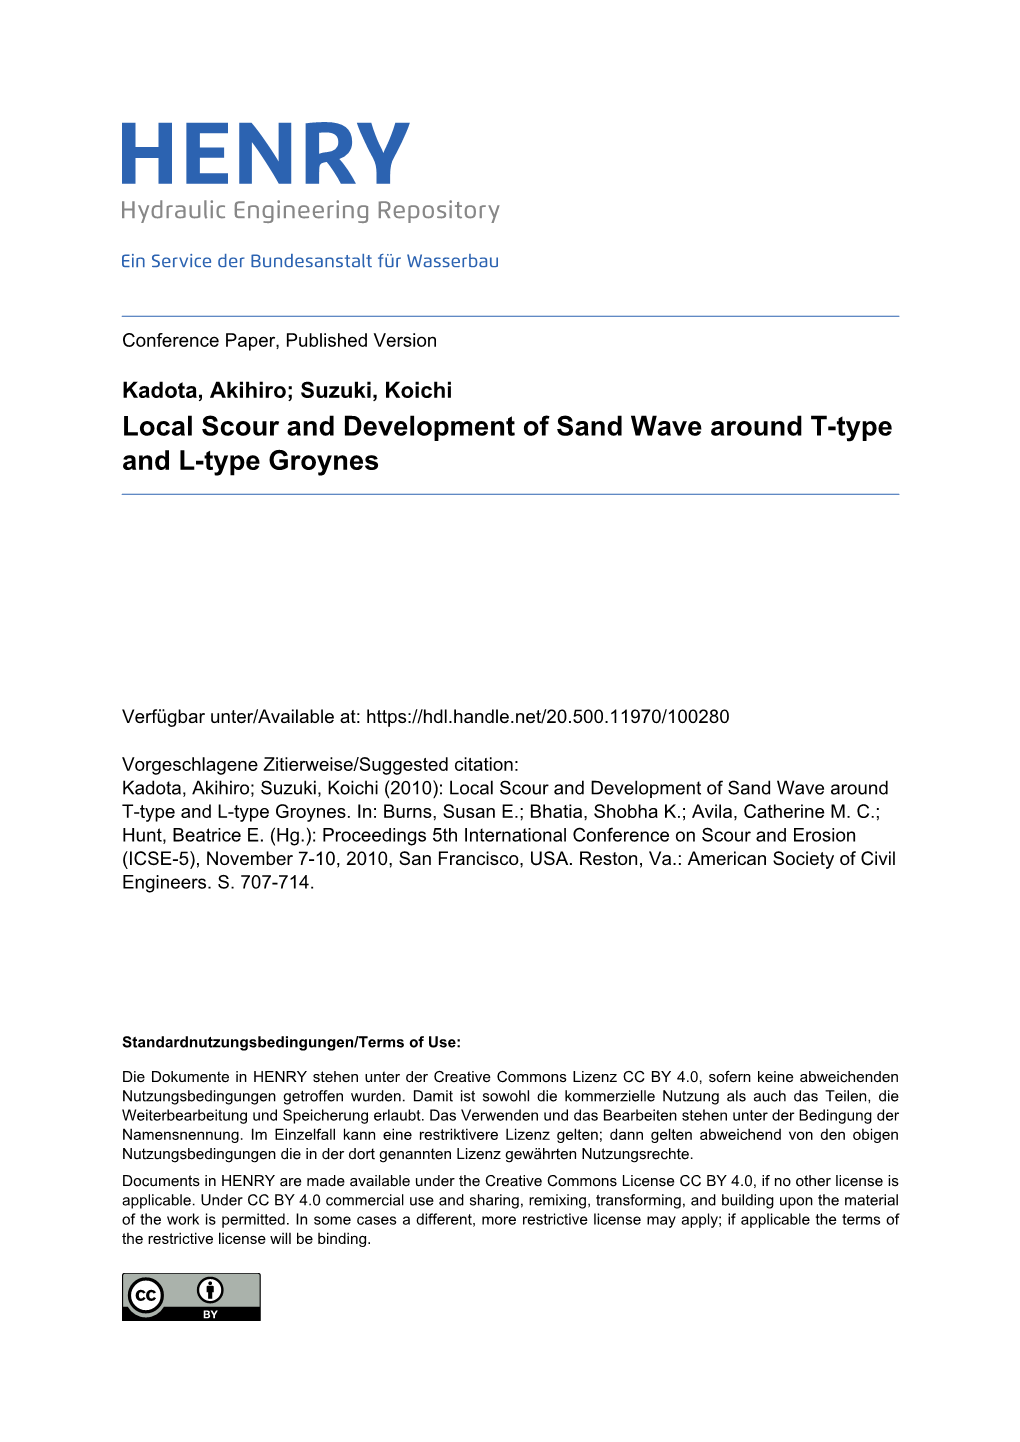 Local Scour and Development of Sand Wave Around T-Type and L-Type Groynes